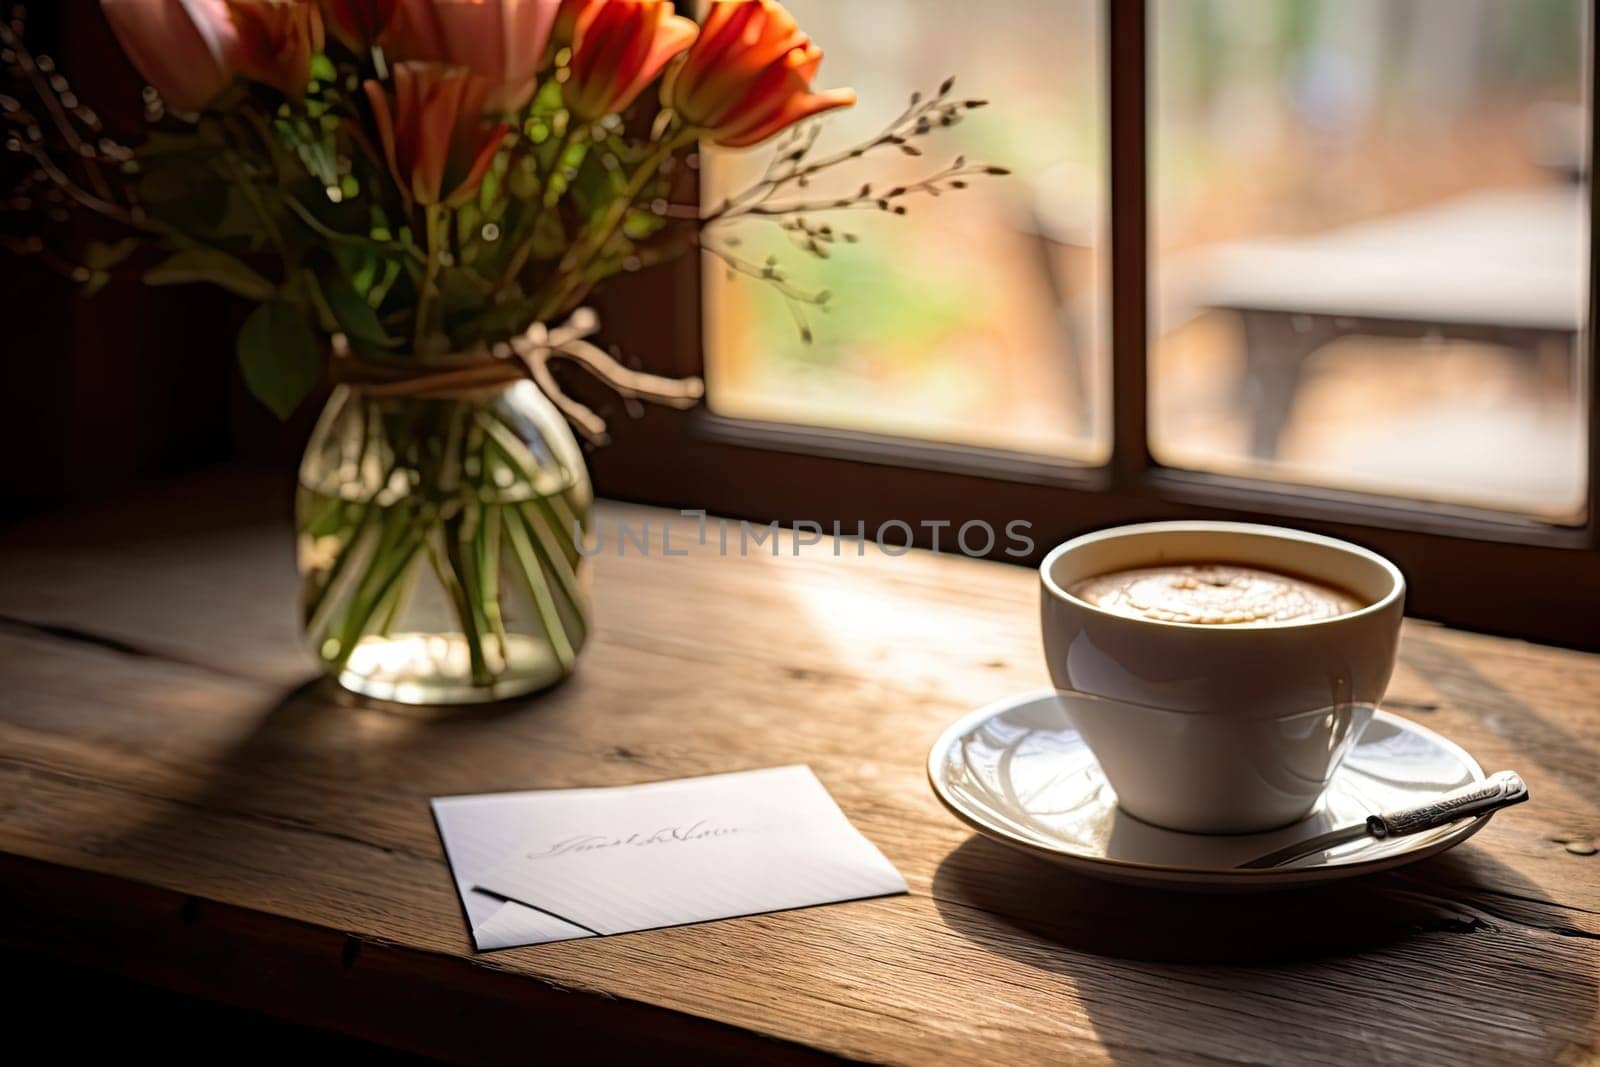 a cup and saucer on a wooden table next to a vase with orange flowers in the photo is blurry